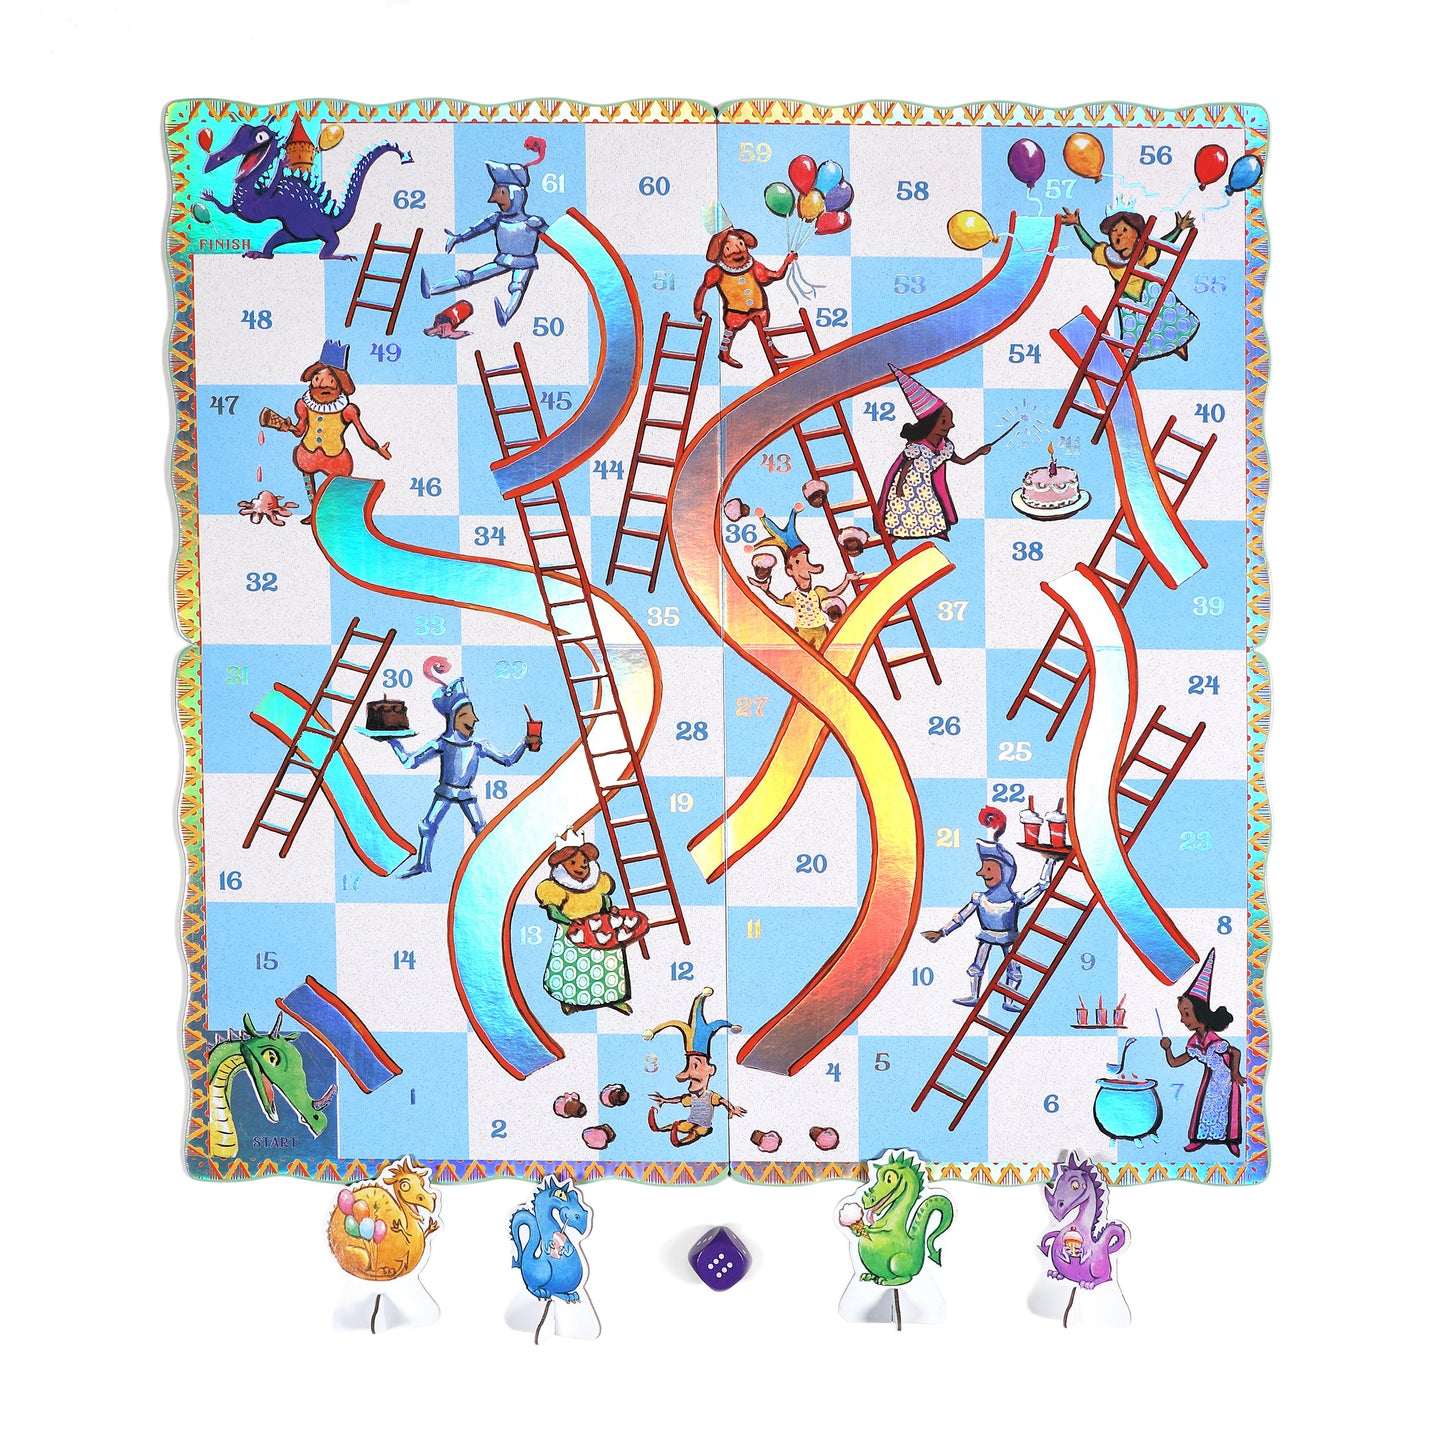 Dragons Slips & Ladders Award Winning Classic Board Game eeBoo Unique Cute Gift for Kids ages 5+